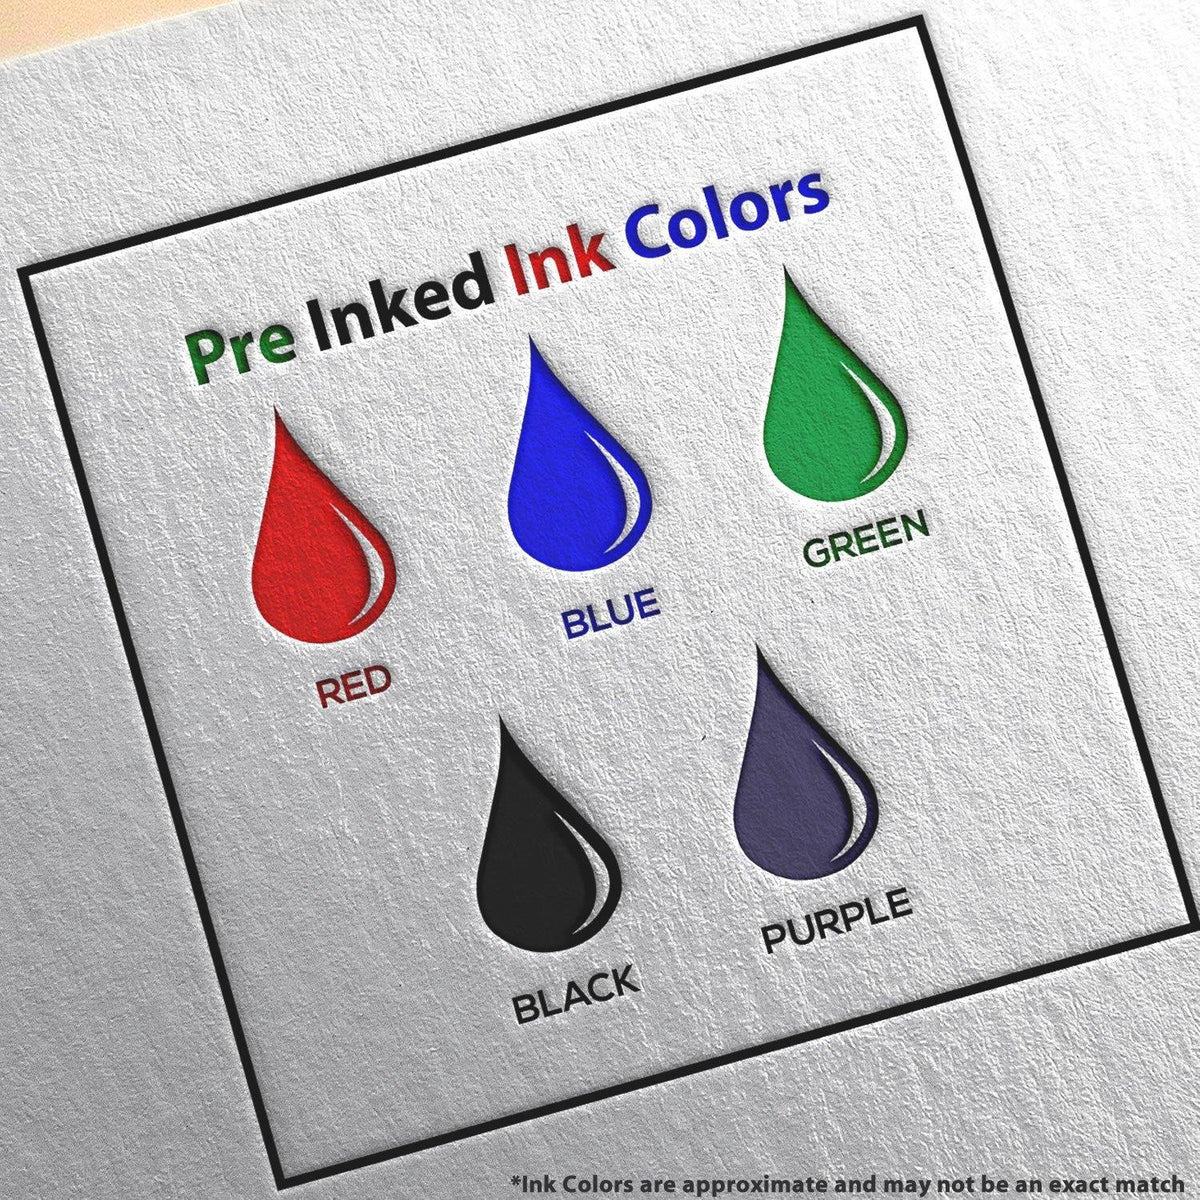 Slim Pre-Inked Check Your Work Stamp Ink Color Options